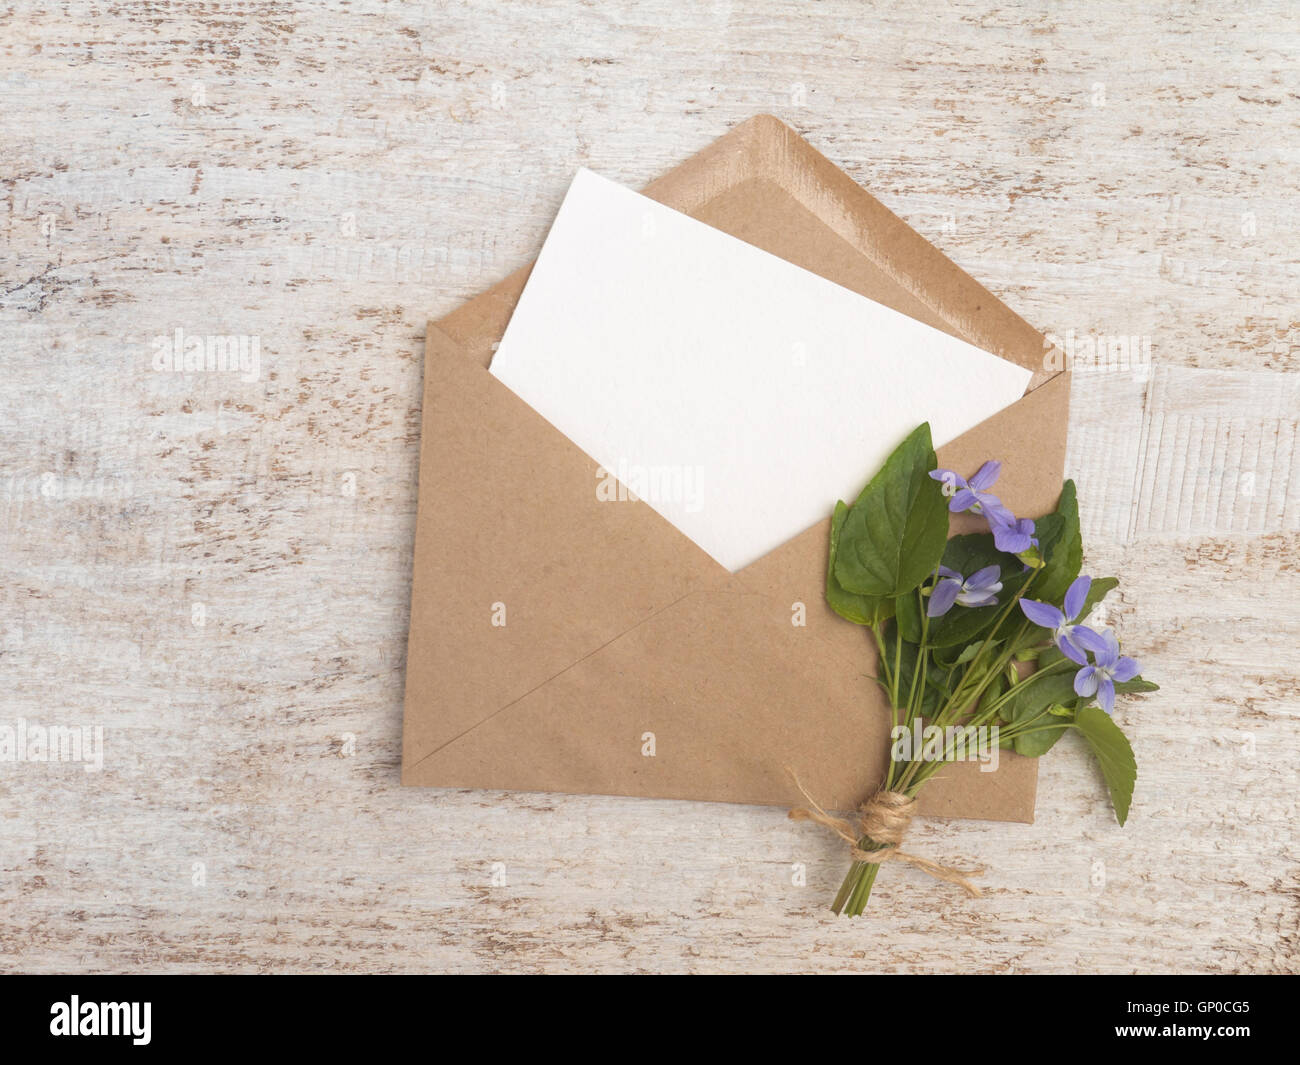 28,223 Brown Paper Bouquet Images, Stock Photos, 3D objects